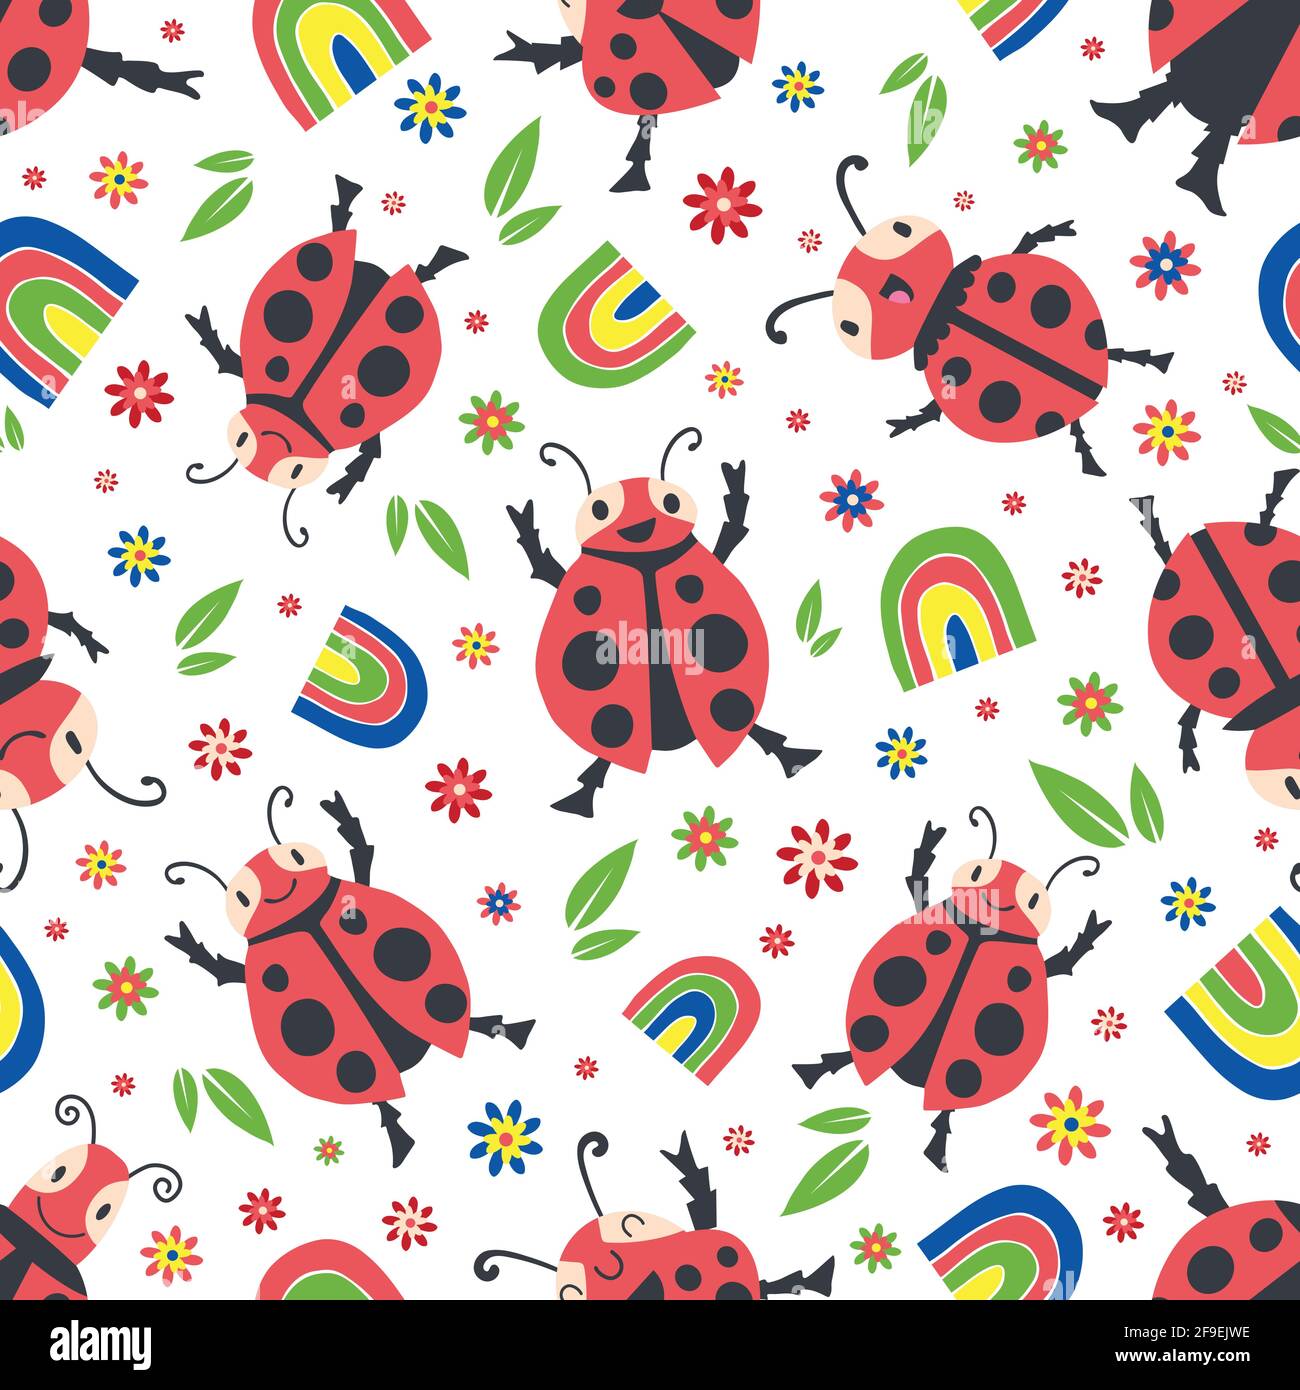 Cute ladybirds and rainbows seamless vector pattern background. Happy dancing ladybugs in childlike drawing style. Design in primary colors with Stock Vector